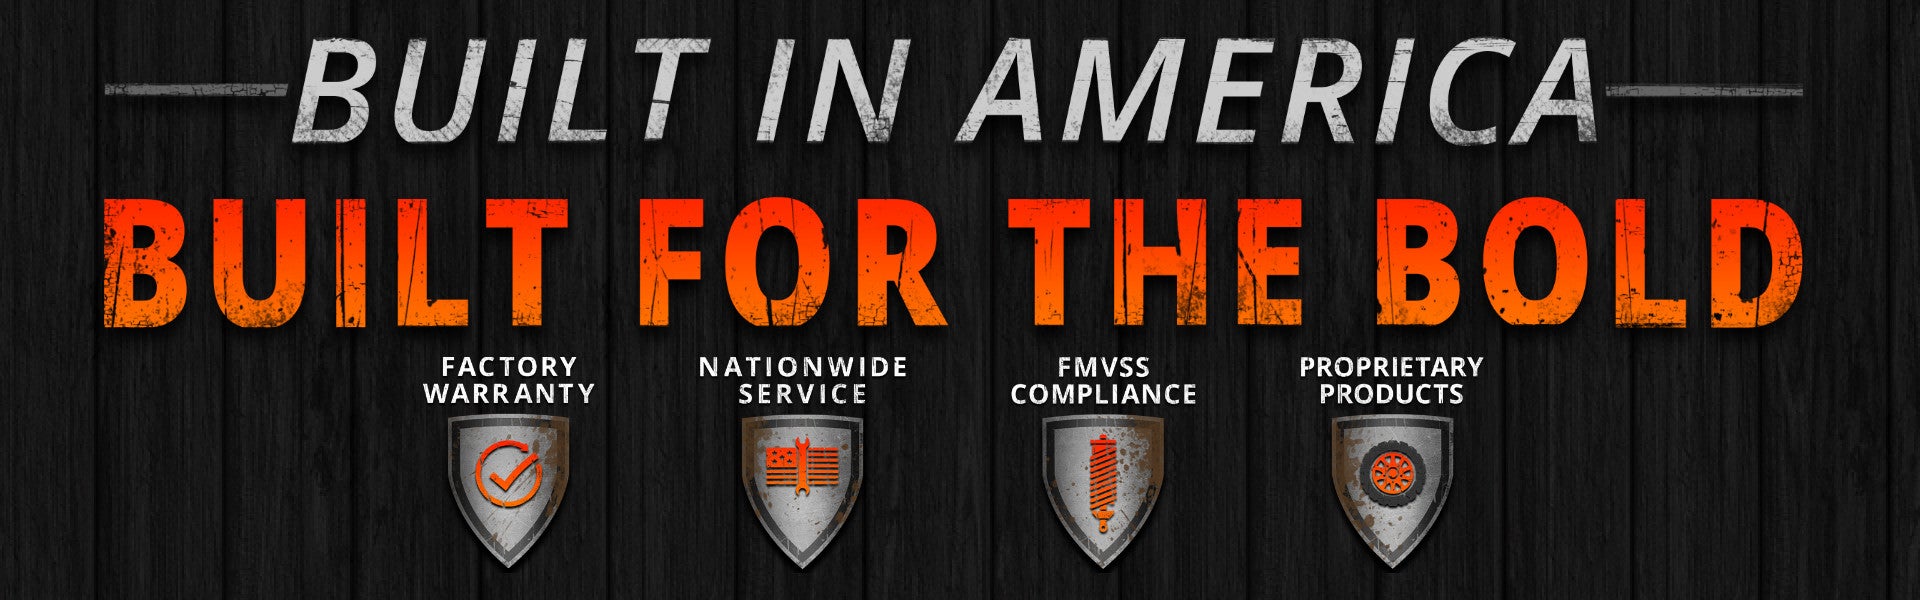 Built in America. Built for the bold. Factory Warranty. Nationwide Service. FMVSS Compliance. Propietary Products.